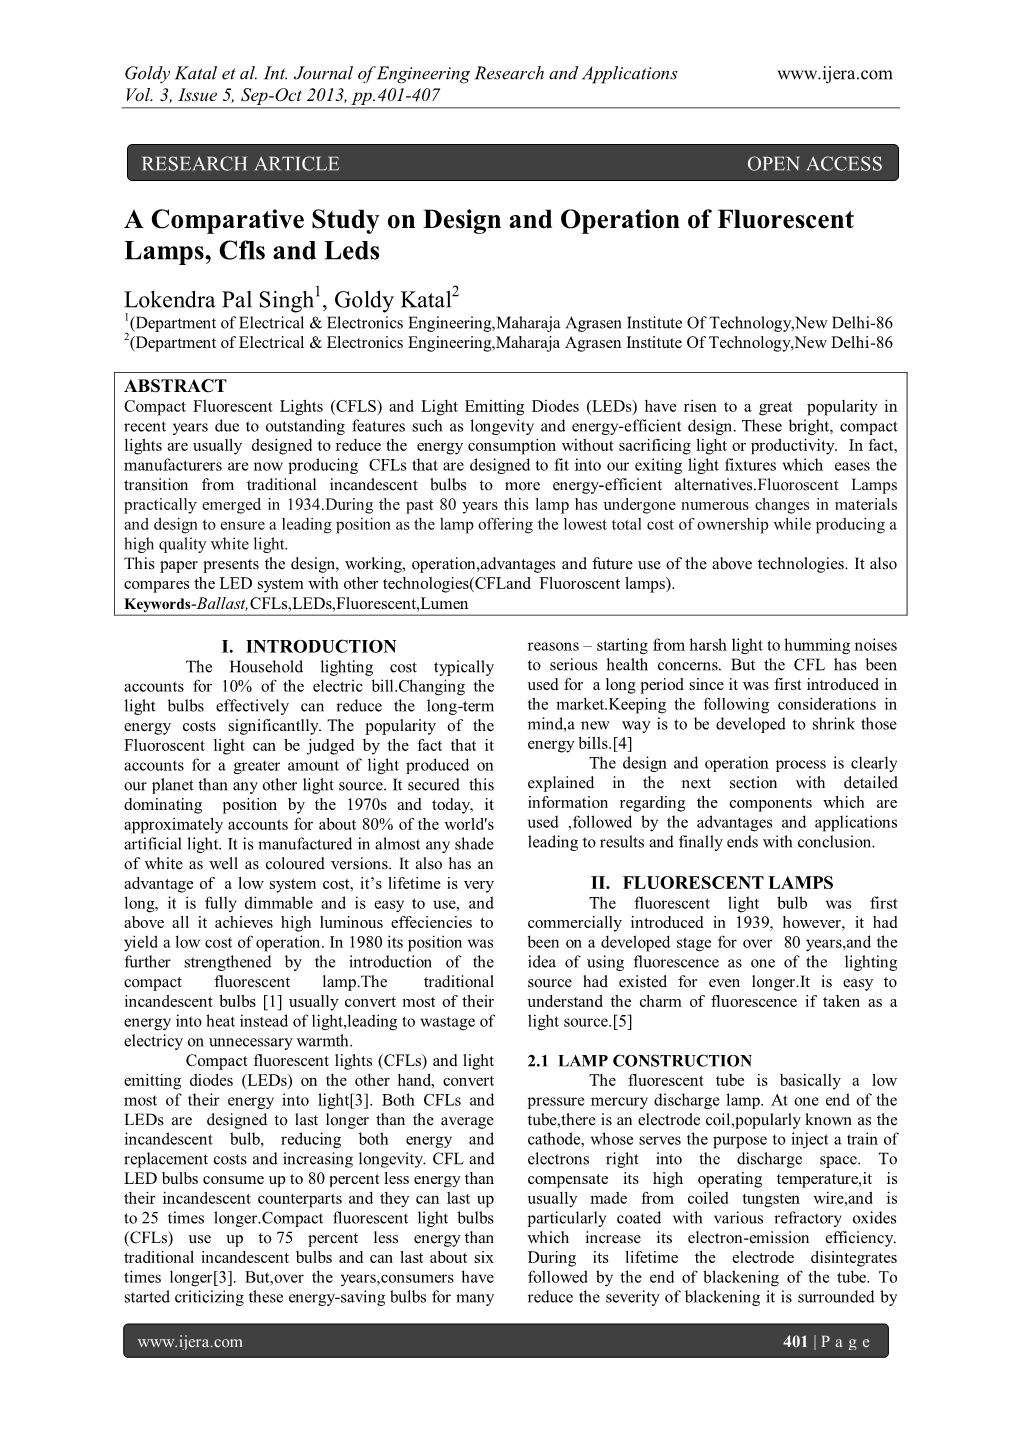 A Comparative Study on Design and Operation of Fluorescent Lamps, Cfls and Leds